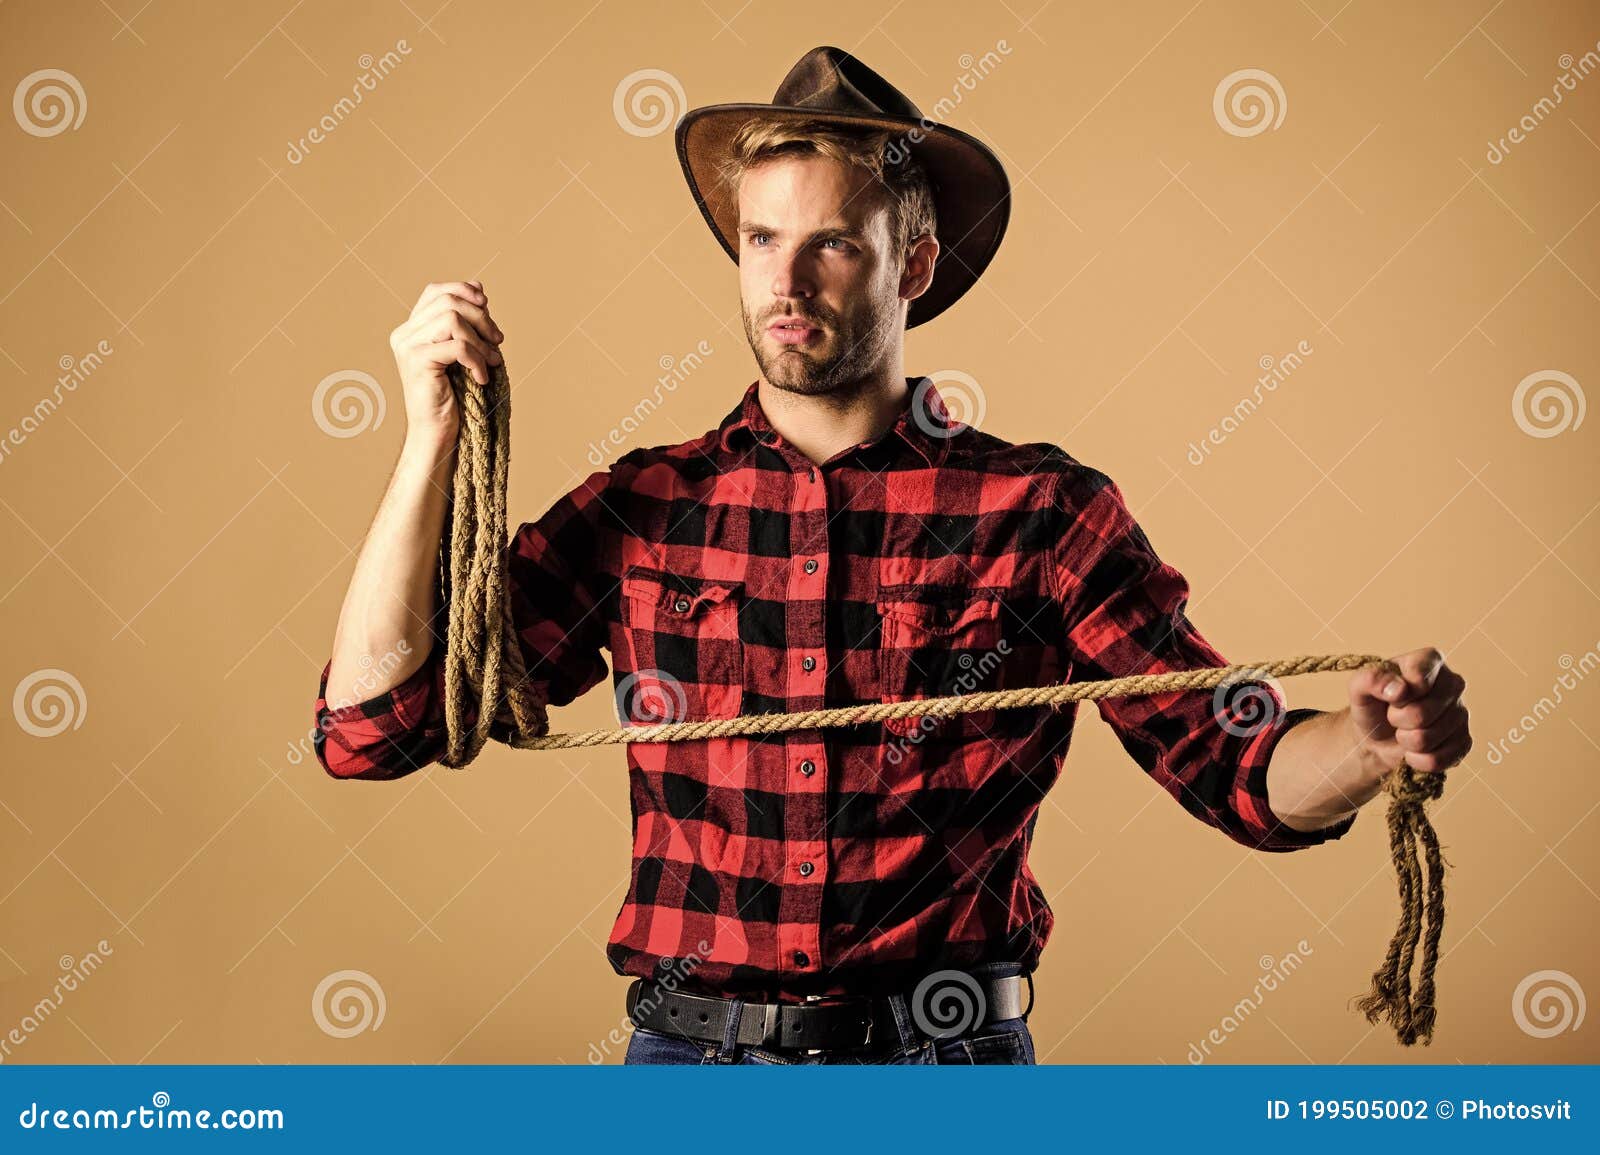 ranch occupations. lasso is used in rodeos part competitive events. lasso can be tied or wrapped. western life. man